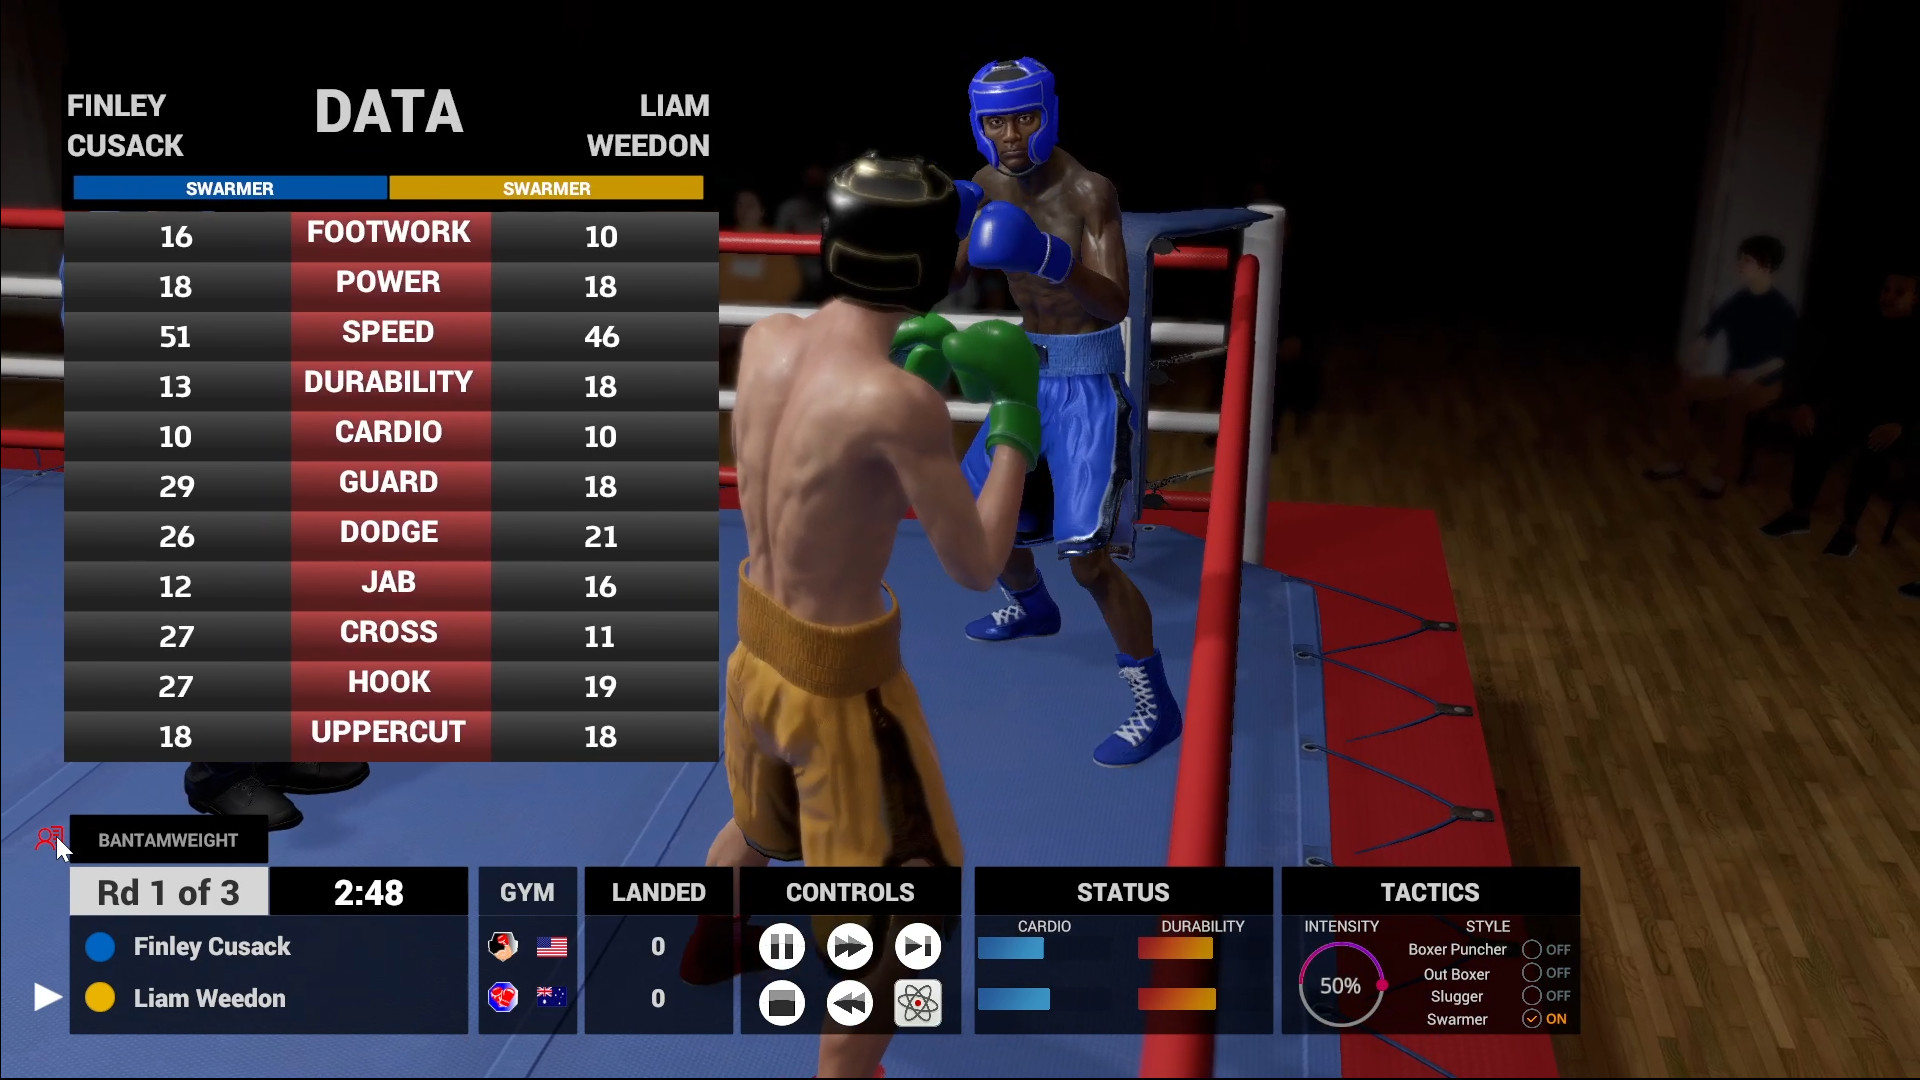 Boxing Club Manager Free Download